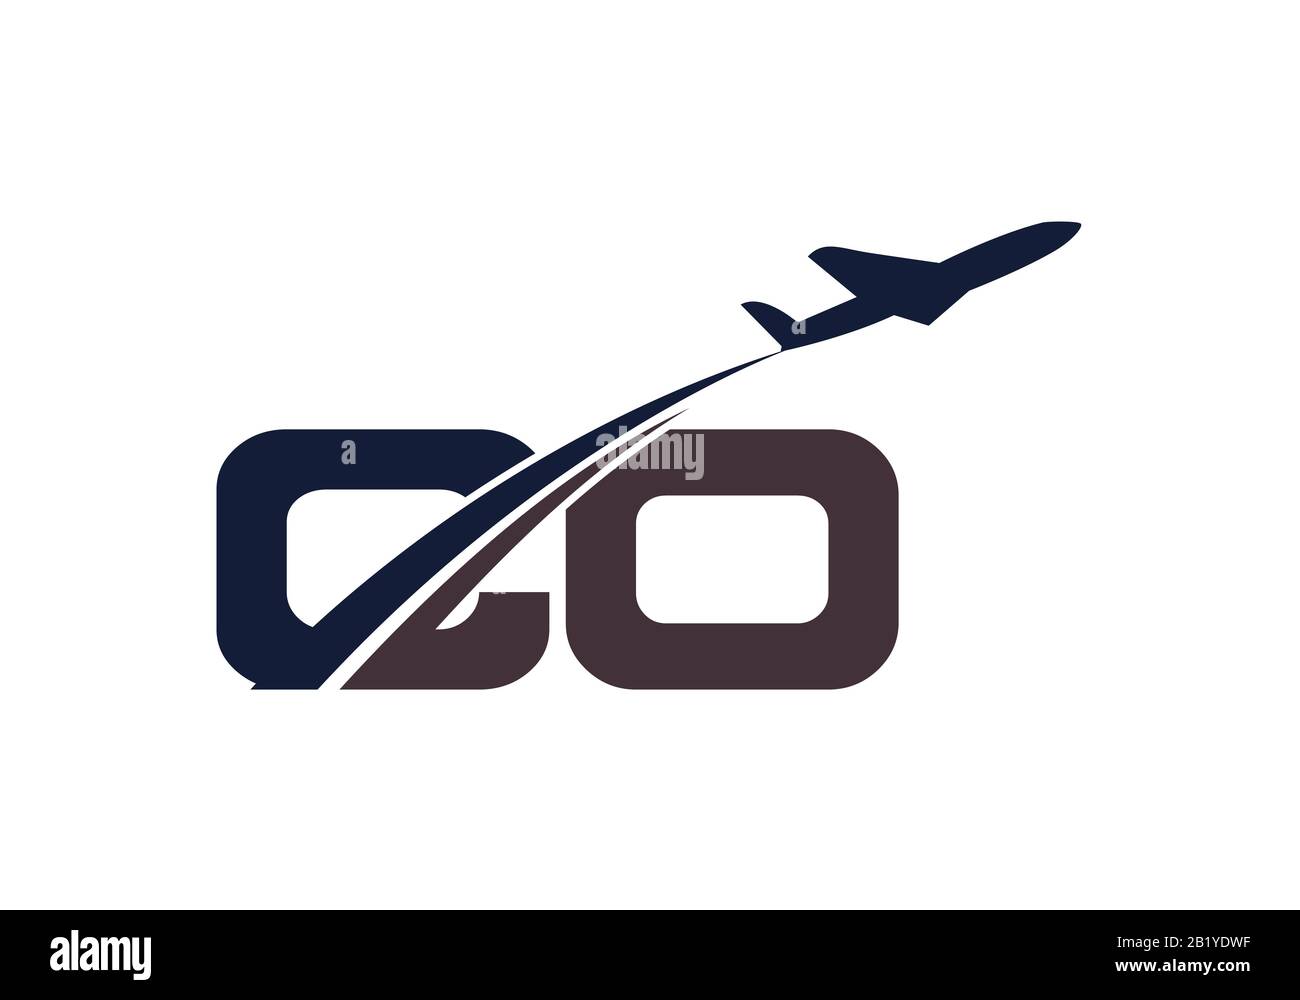 Initial Letter C and O  with Aviation Logo Design, Air, Airline, Airplane and Travel Logo template. Stock Vector